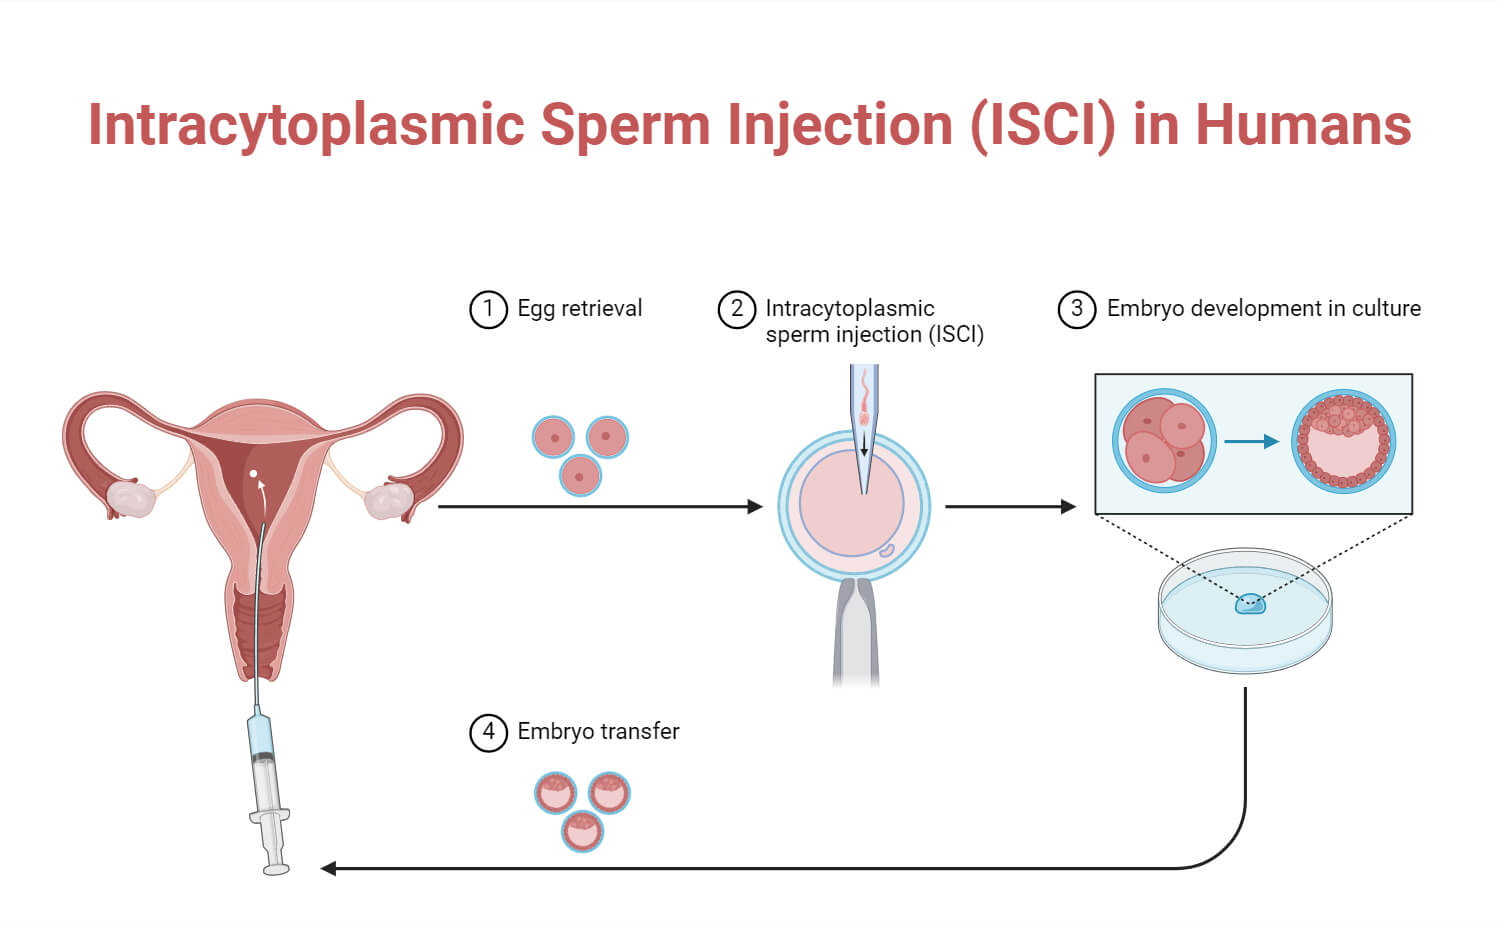 Intracytoplasmic Sperm Injection (ISCI) in Humans